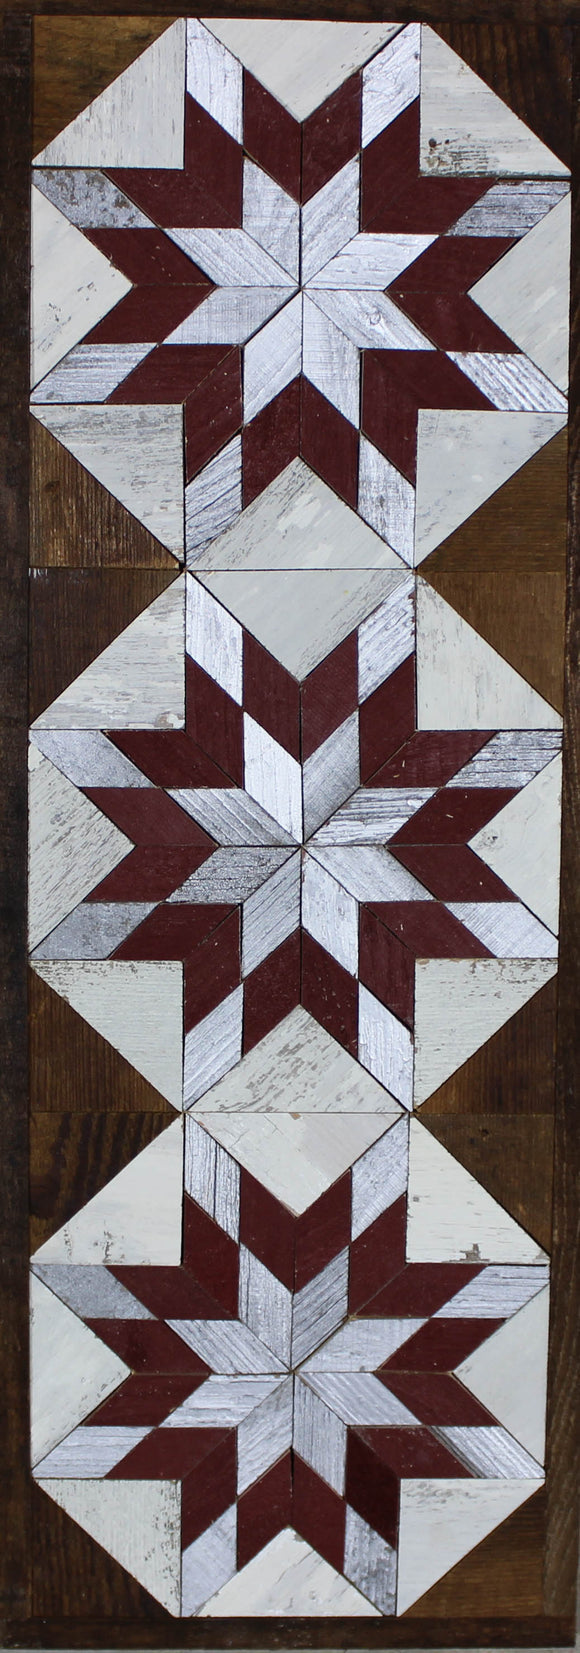 Amish Barn Quilt Wall Art, 30 by 10.5 Silver and Red Starburst